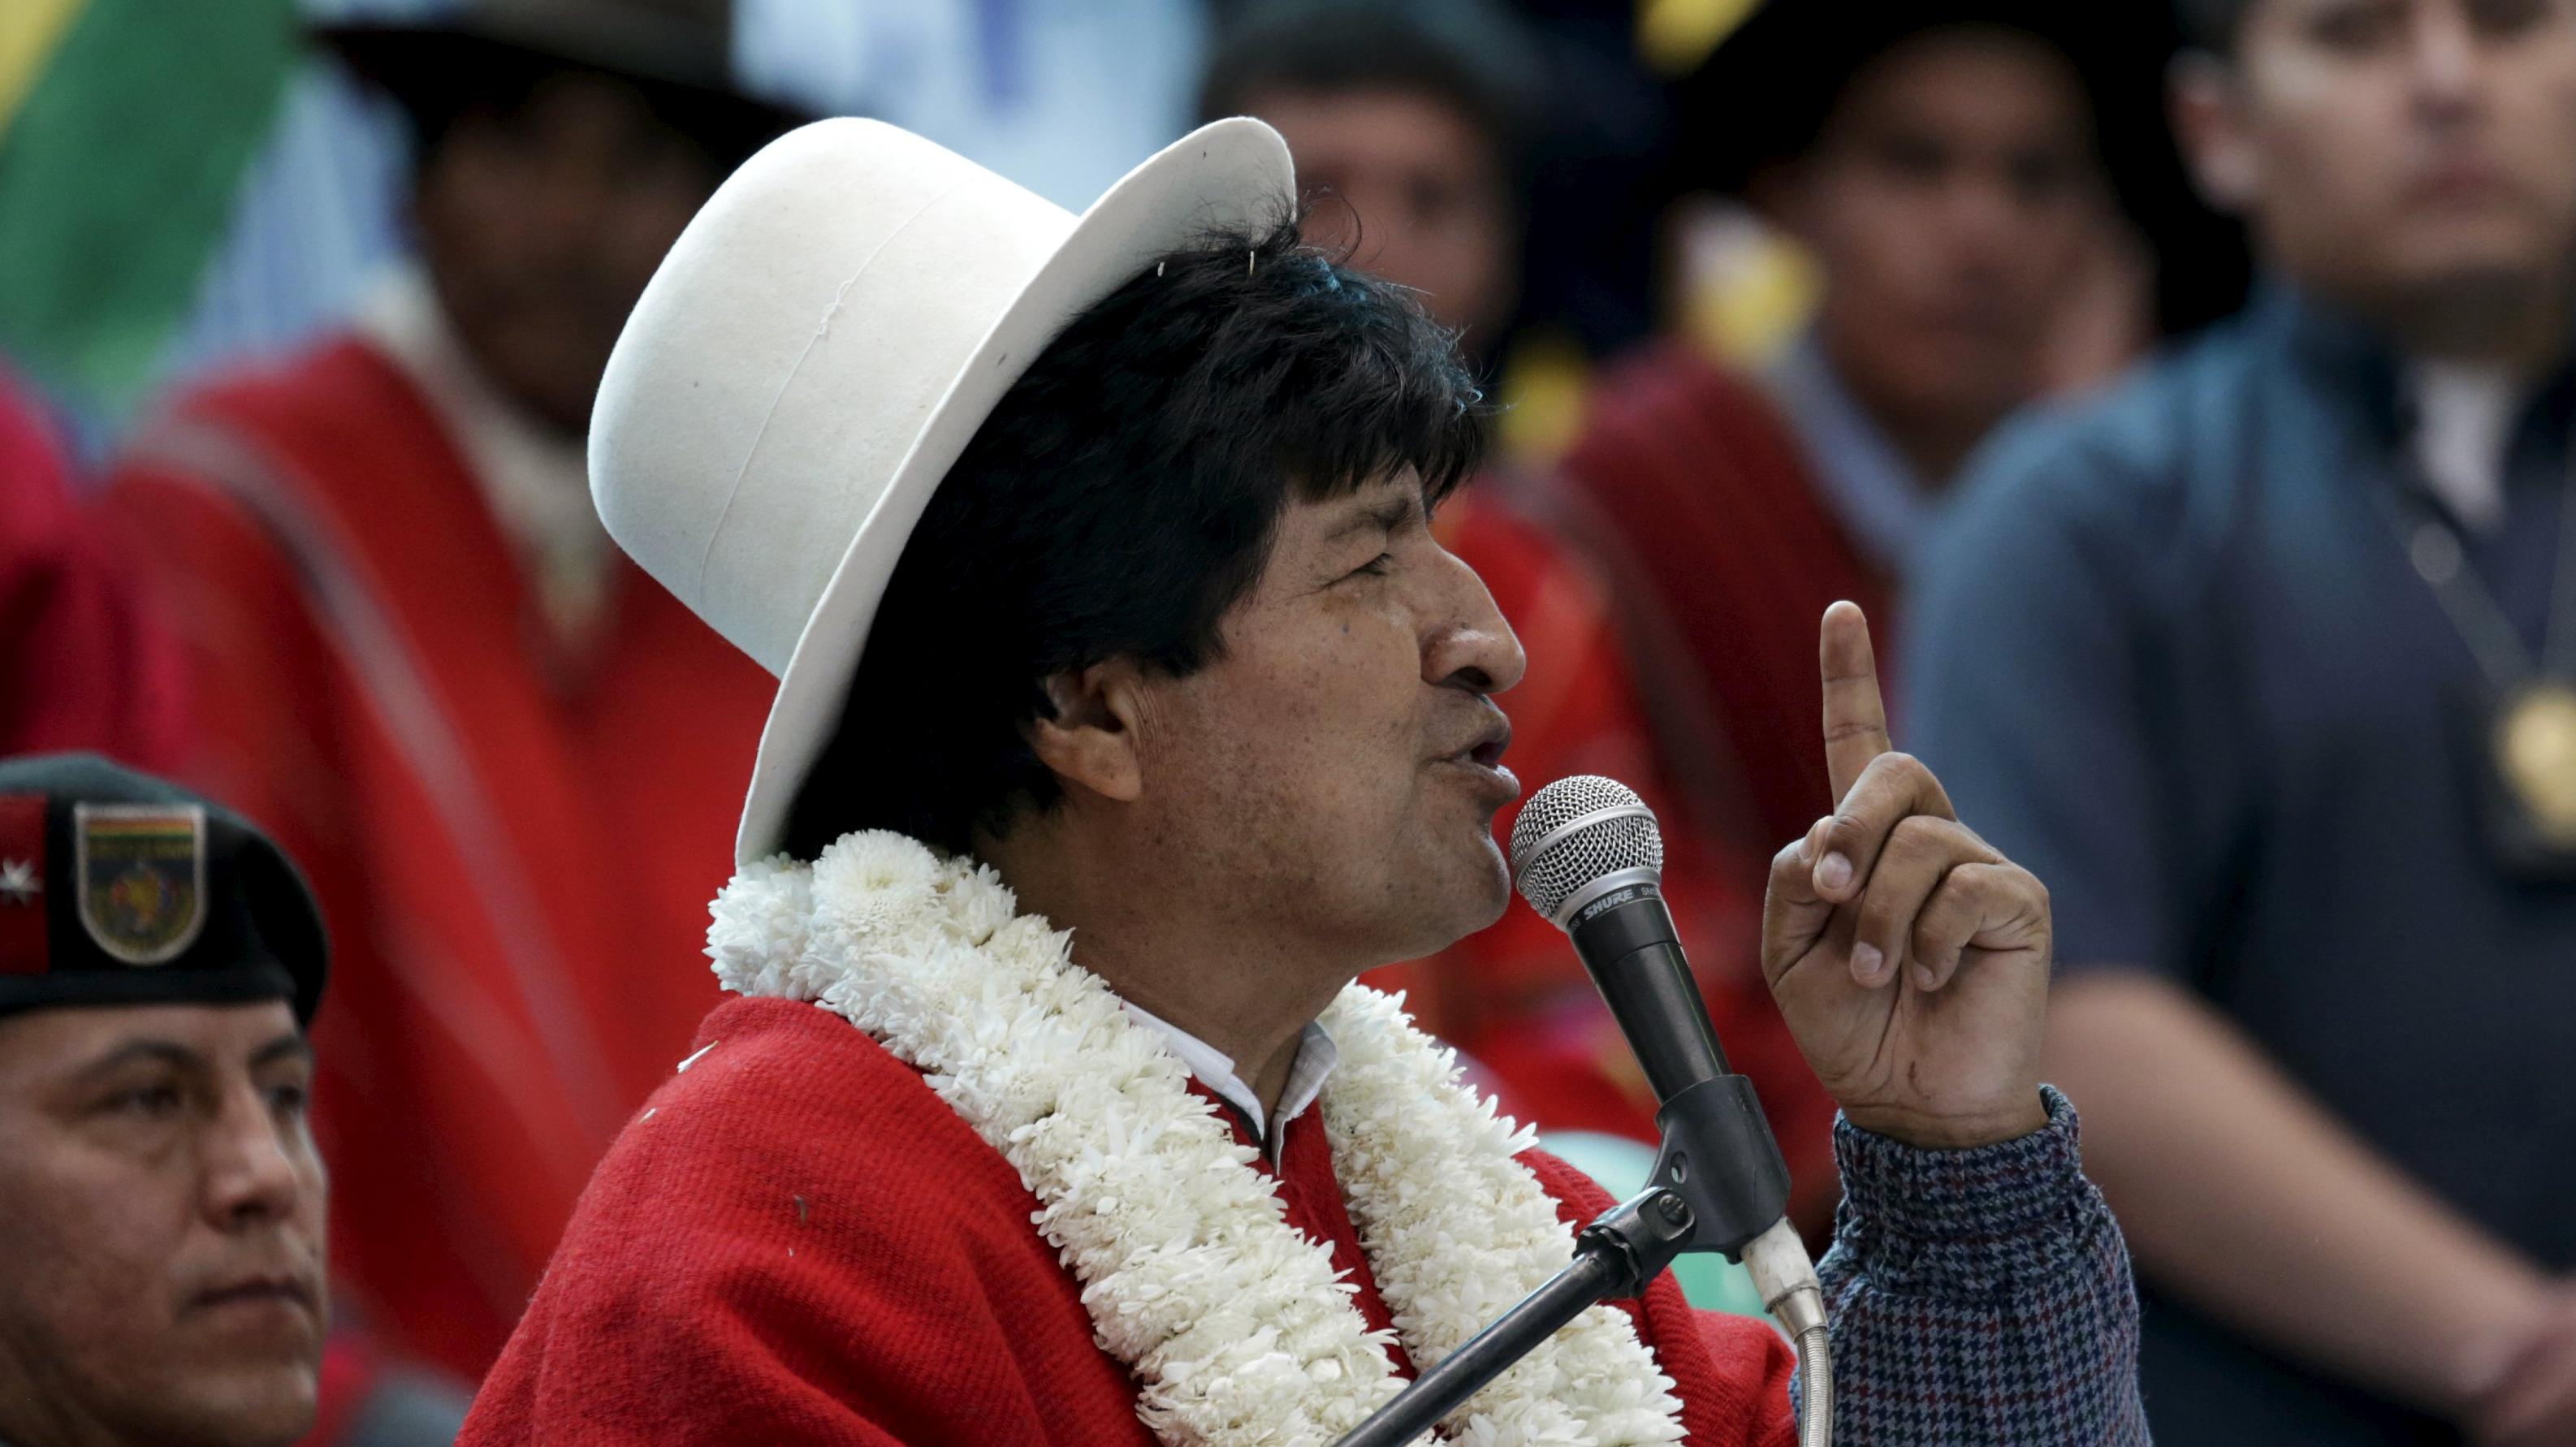 Bolivia's President Evo Morales speaks during the inauguration of the sports arena called 